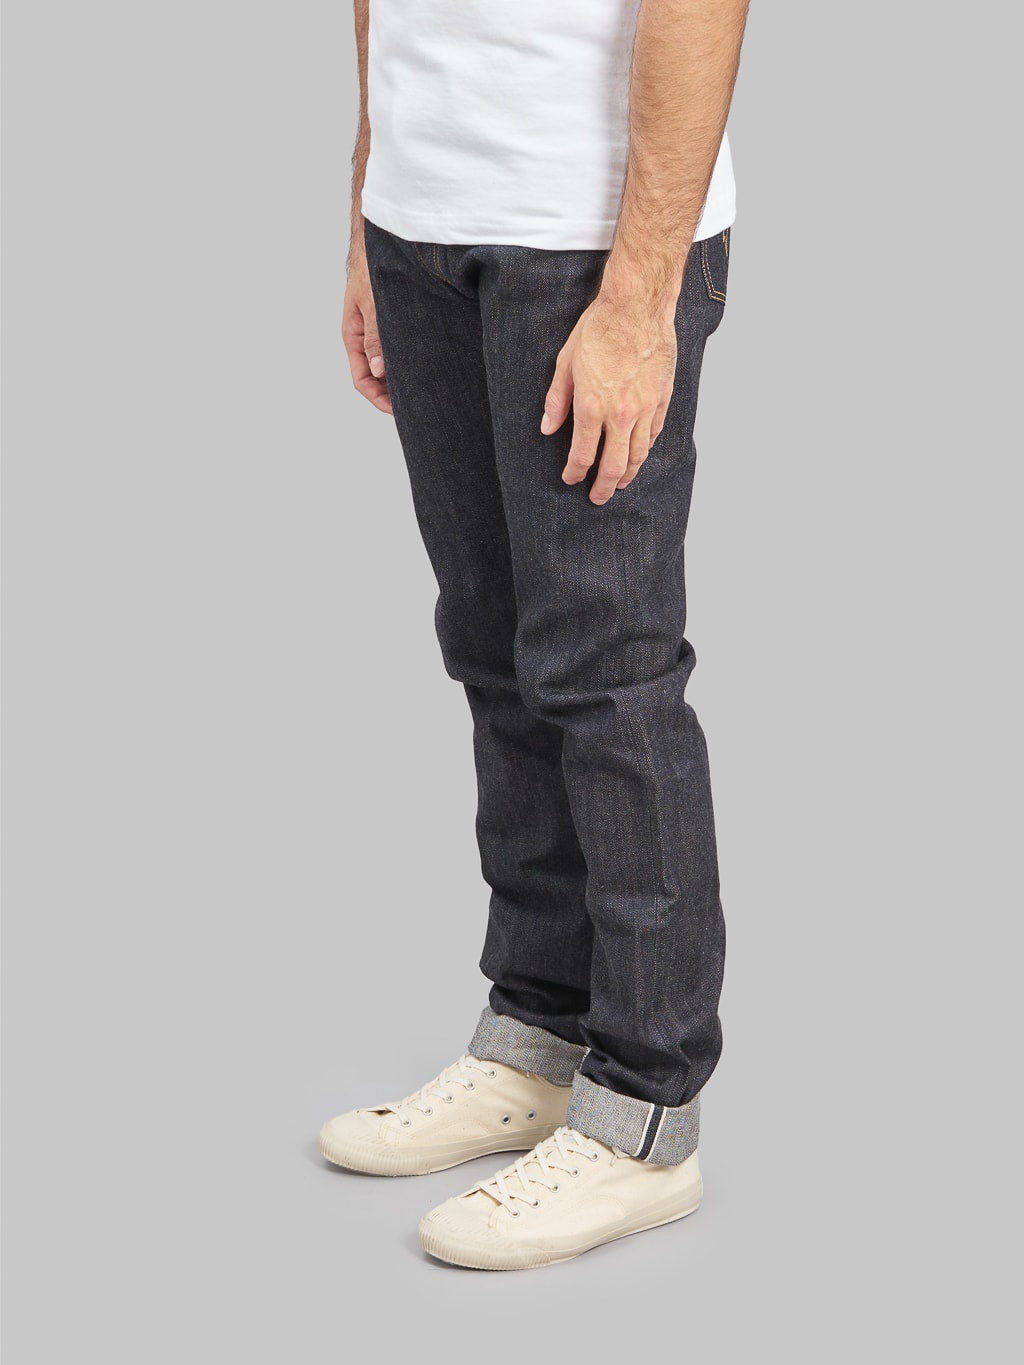 The Flat Head D306 Tight Tapered selvedge Jeans side